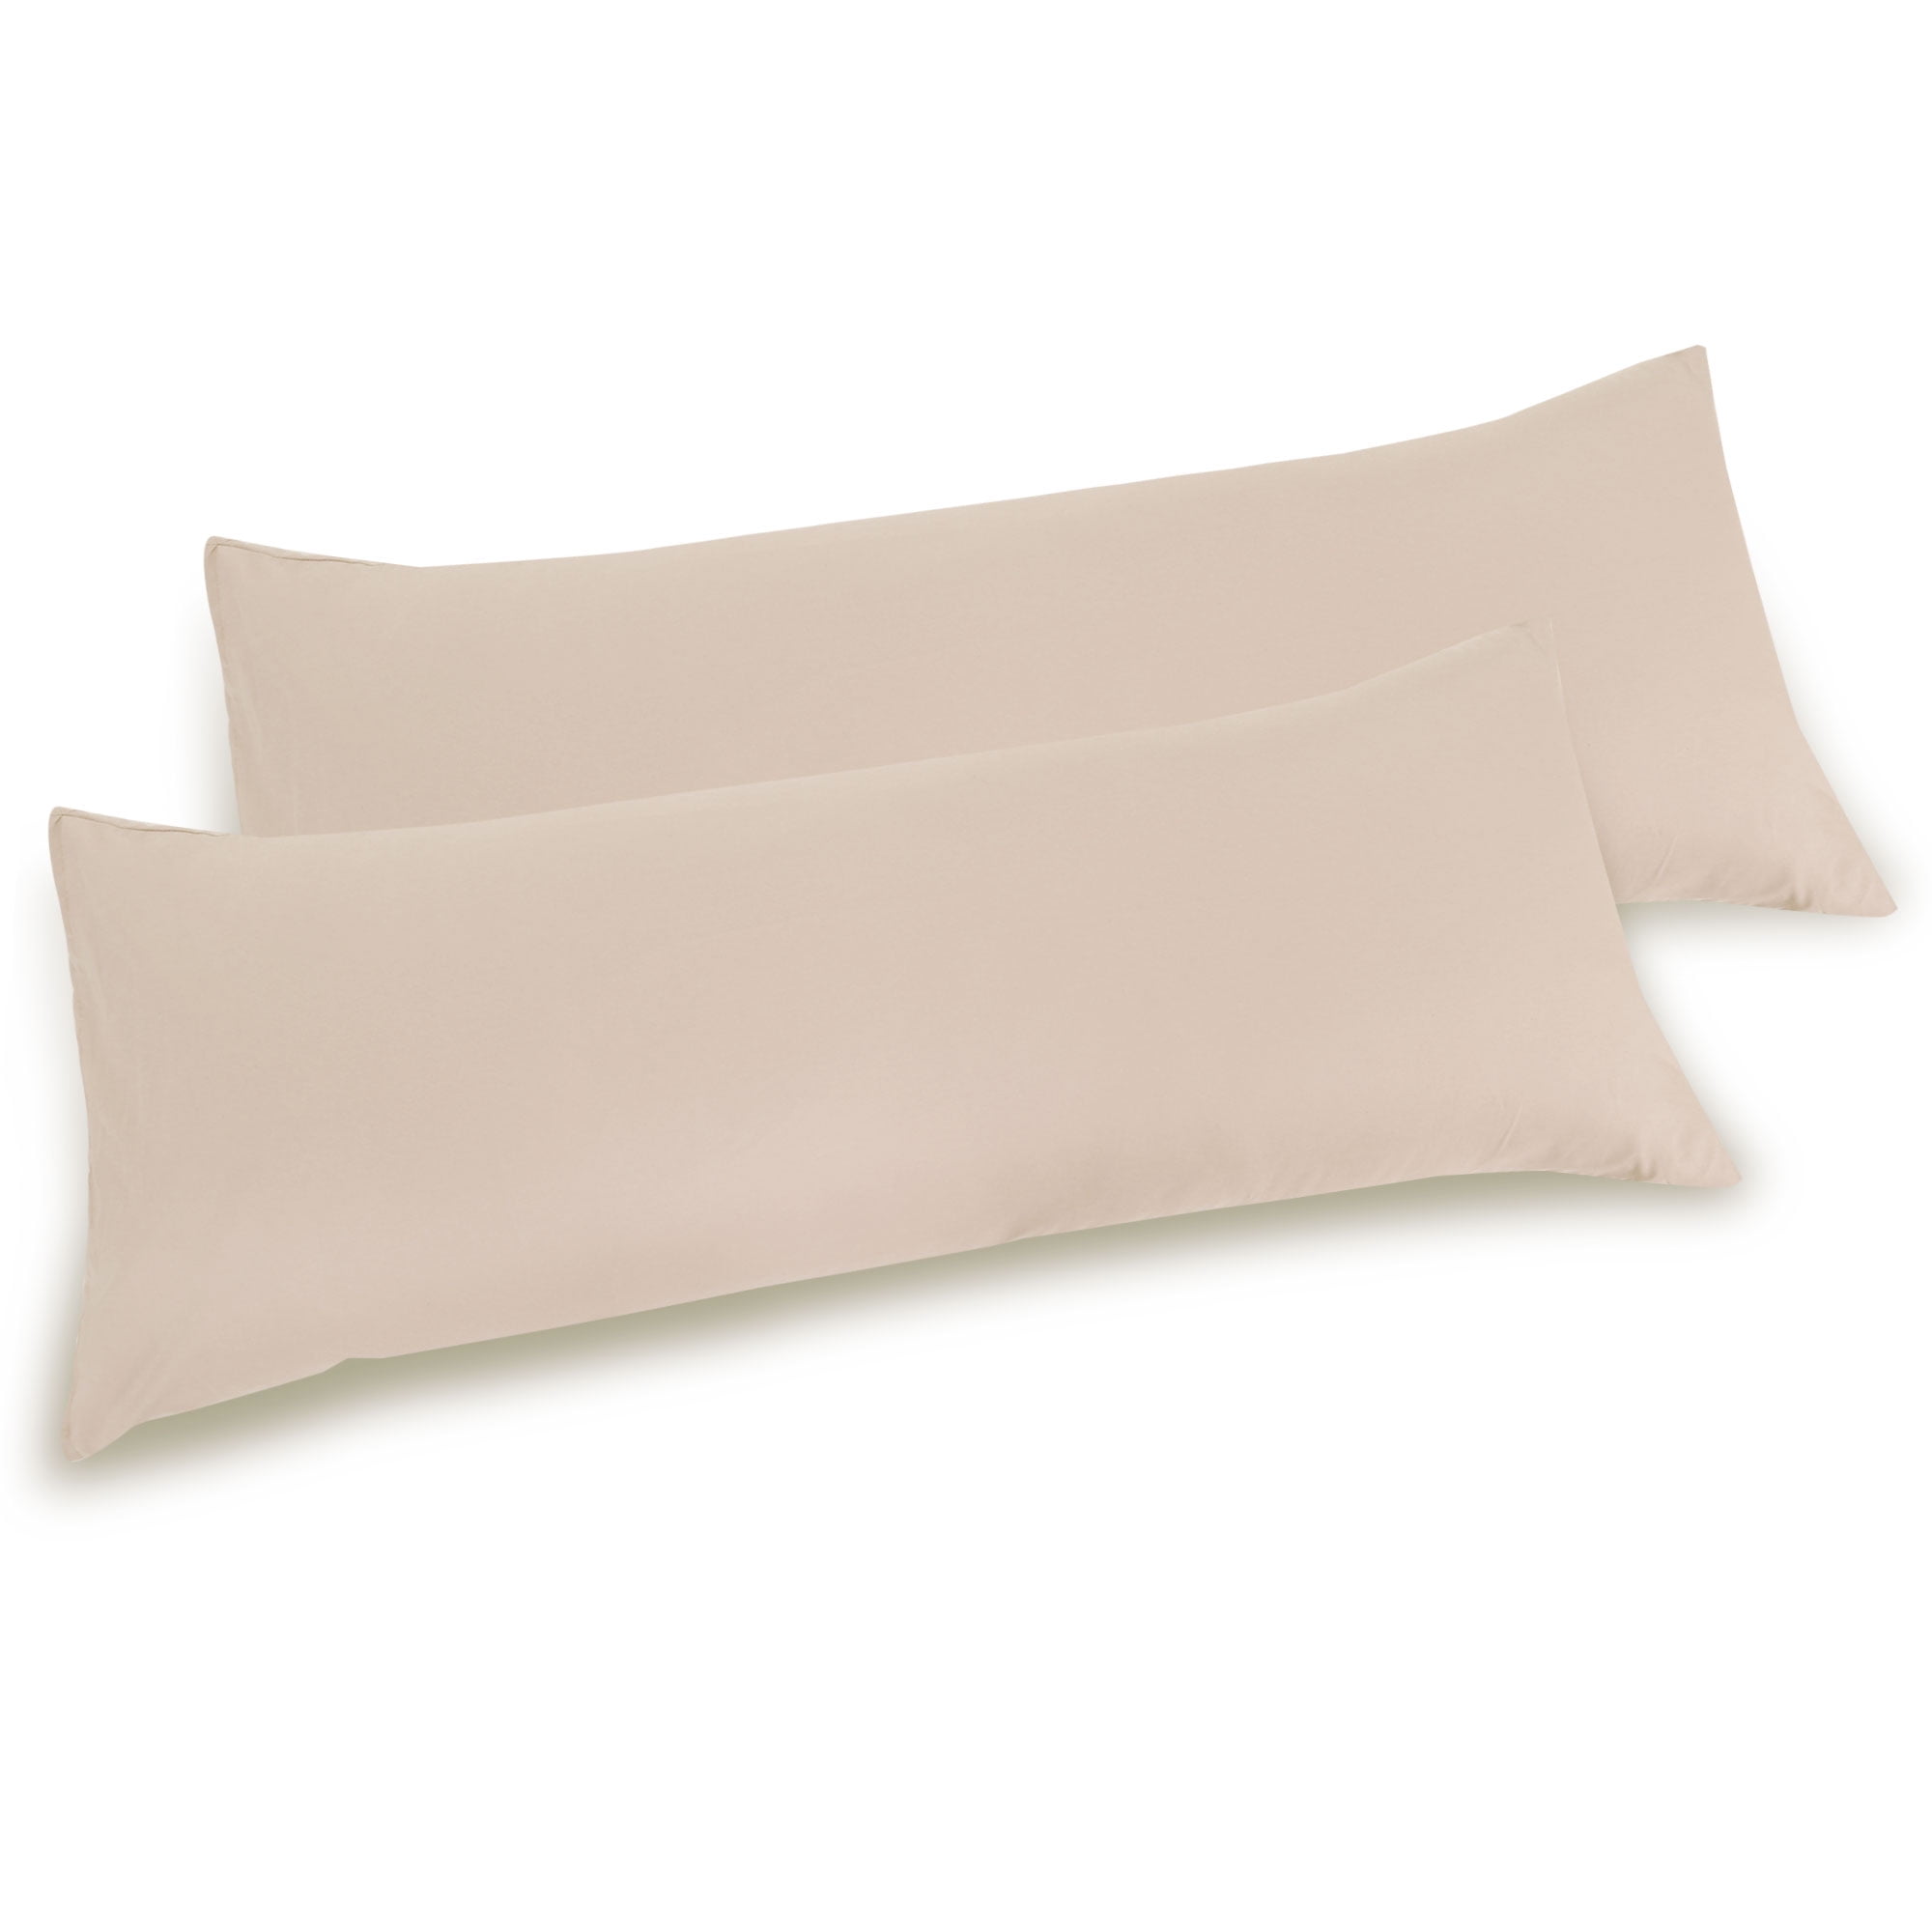 Details about   2 Pack 1800 Series Pillowcases Standard or King Size with Envelope Closure 